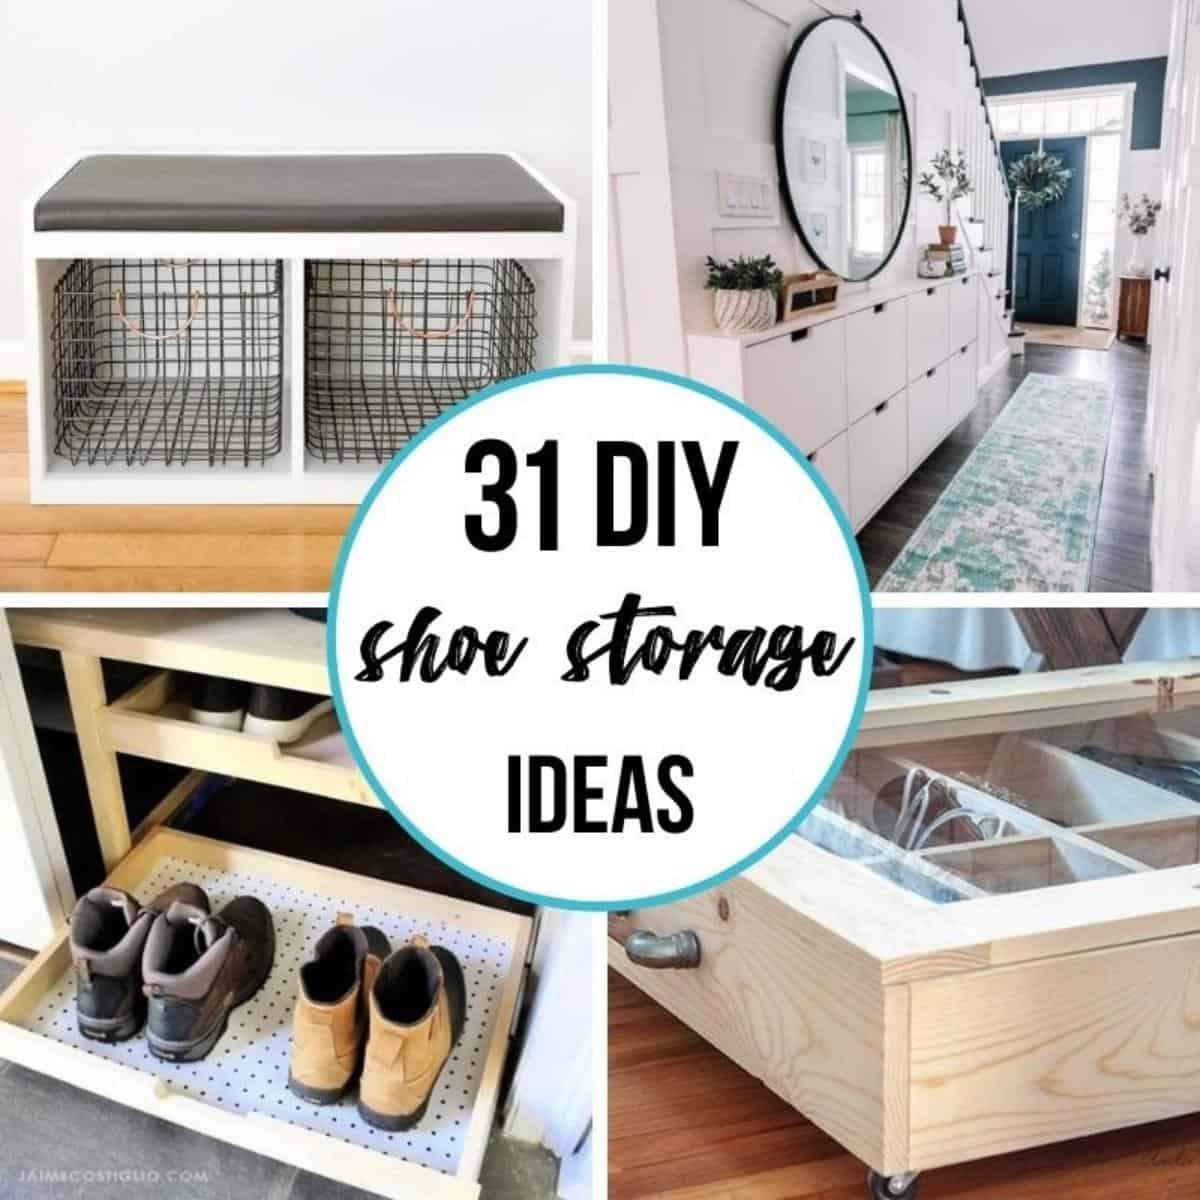 24 DIY Shoe Racks for Your Shoe Collection